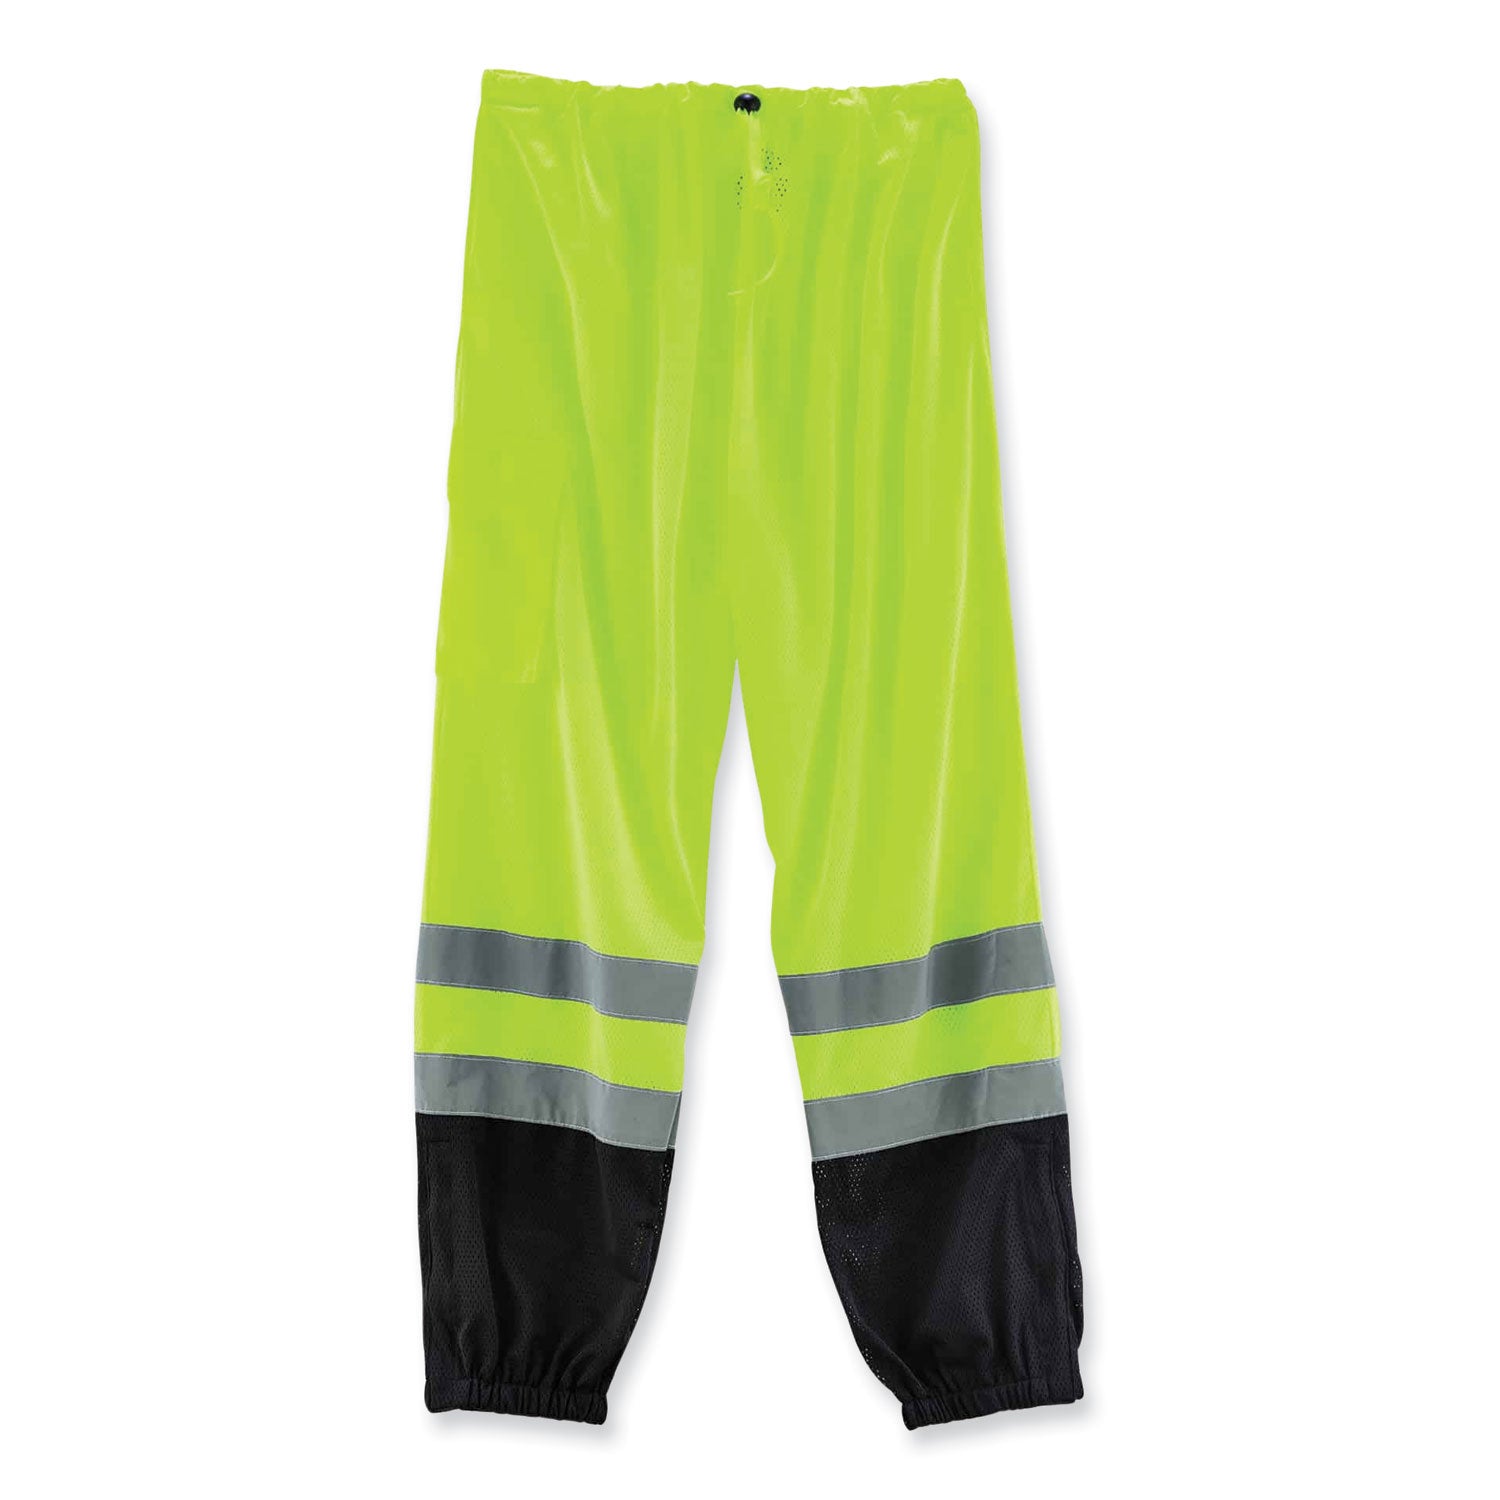 glowear-8910bk-class-e-hi-vis-pants-with-black-bottom-polyester-small-medium-lime-ships-in-1-3-business-days_ego23953 - 2